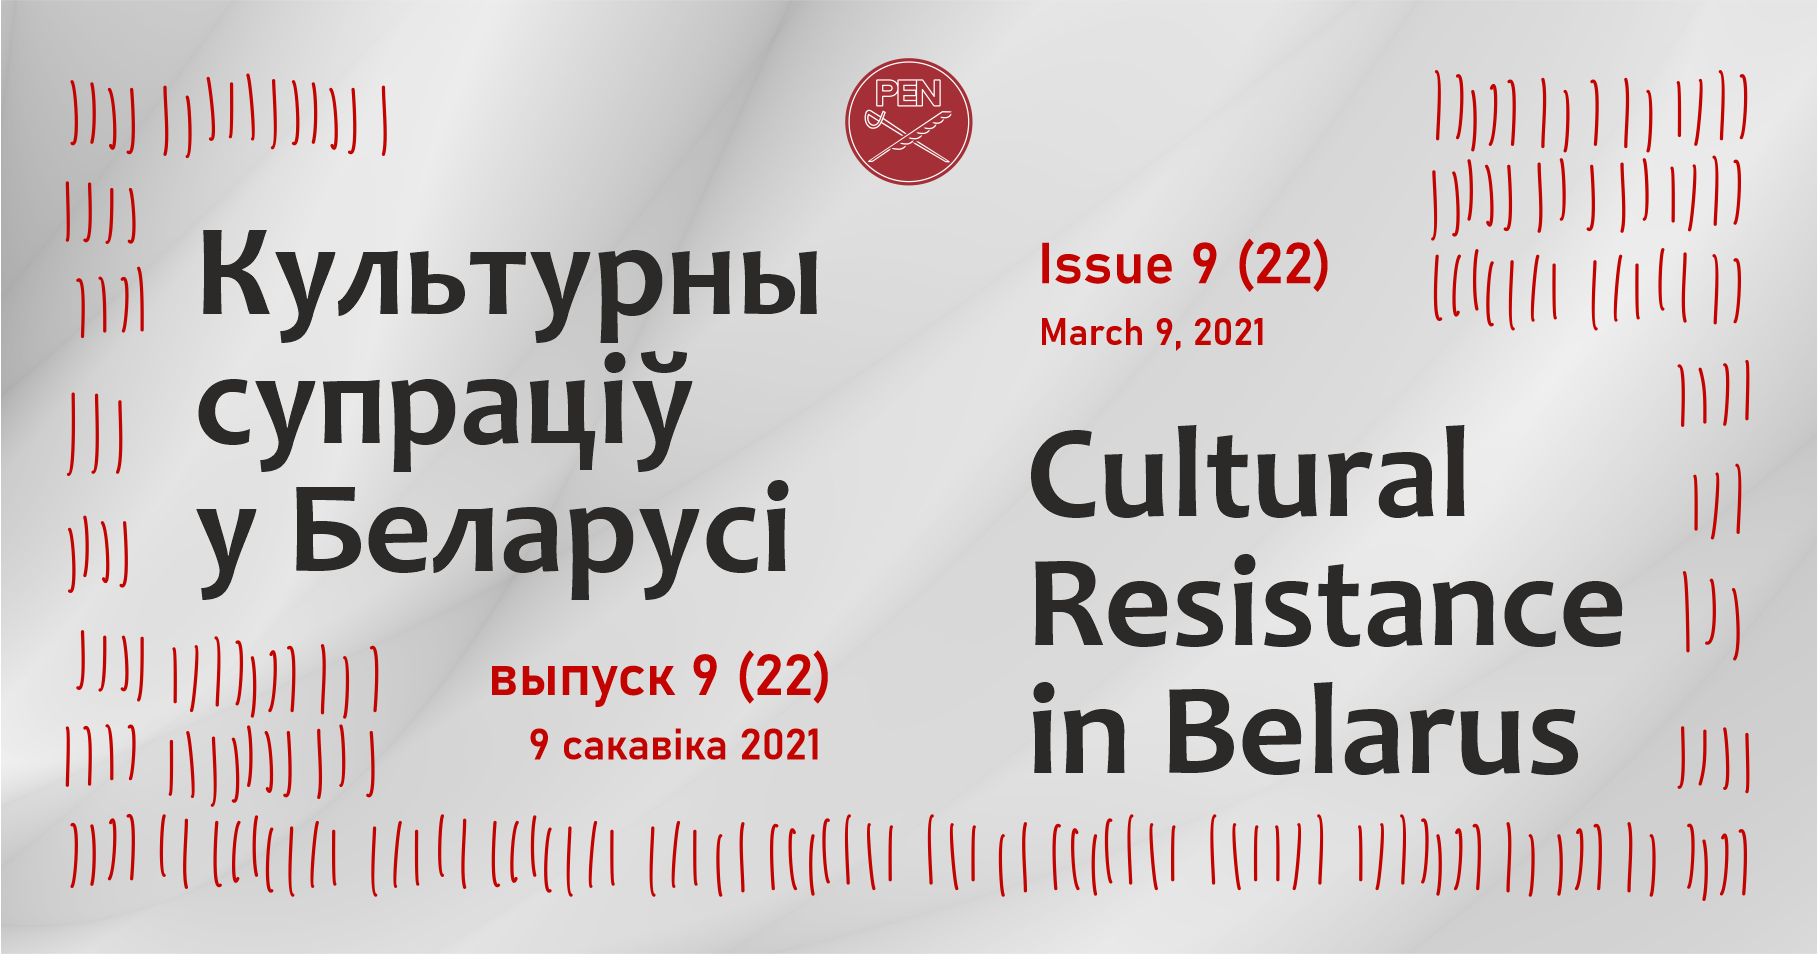 Come out to see the spring! – together with the Belarusian culture in all its life-affirming power. Issue 22